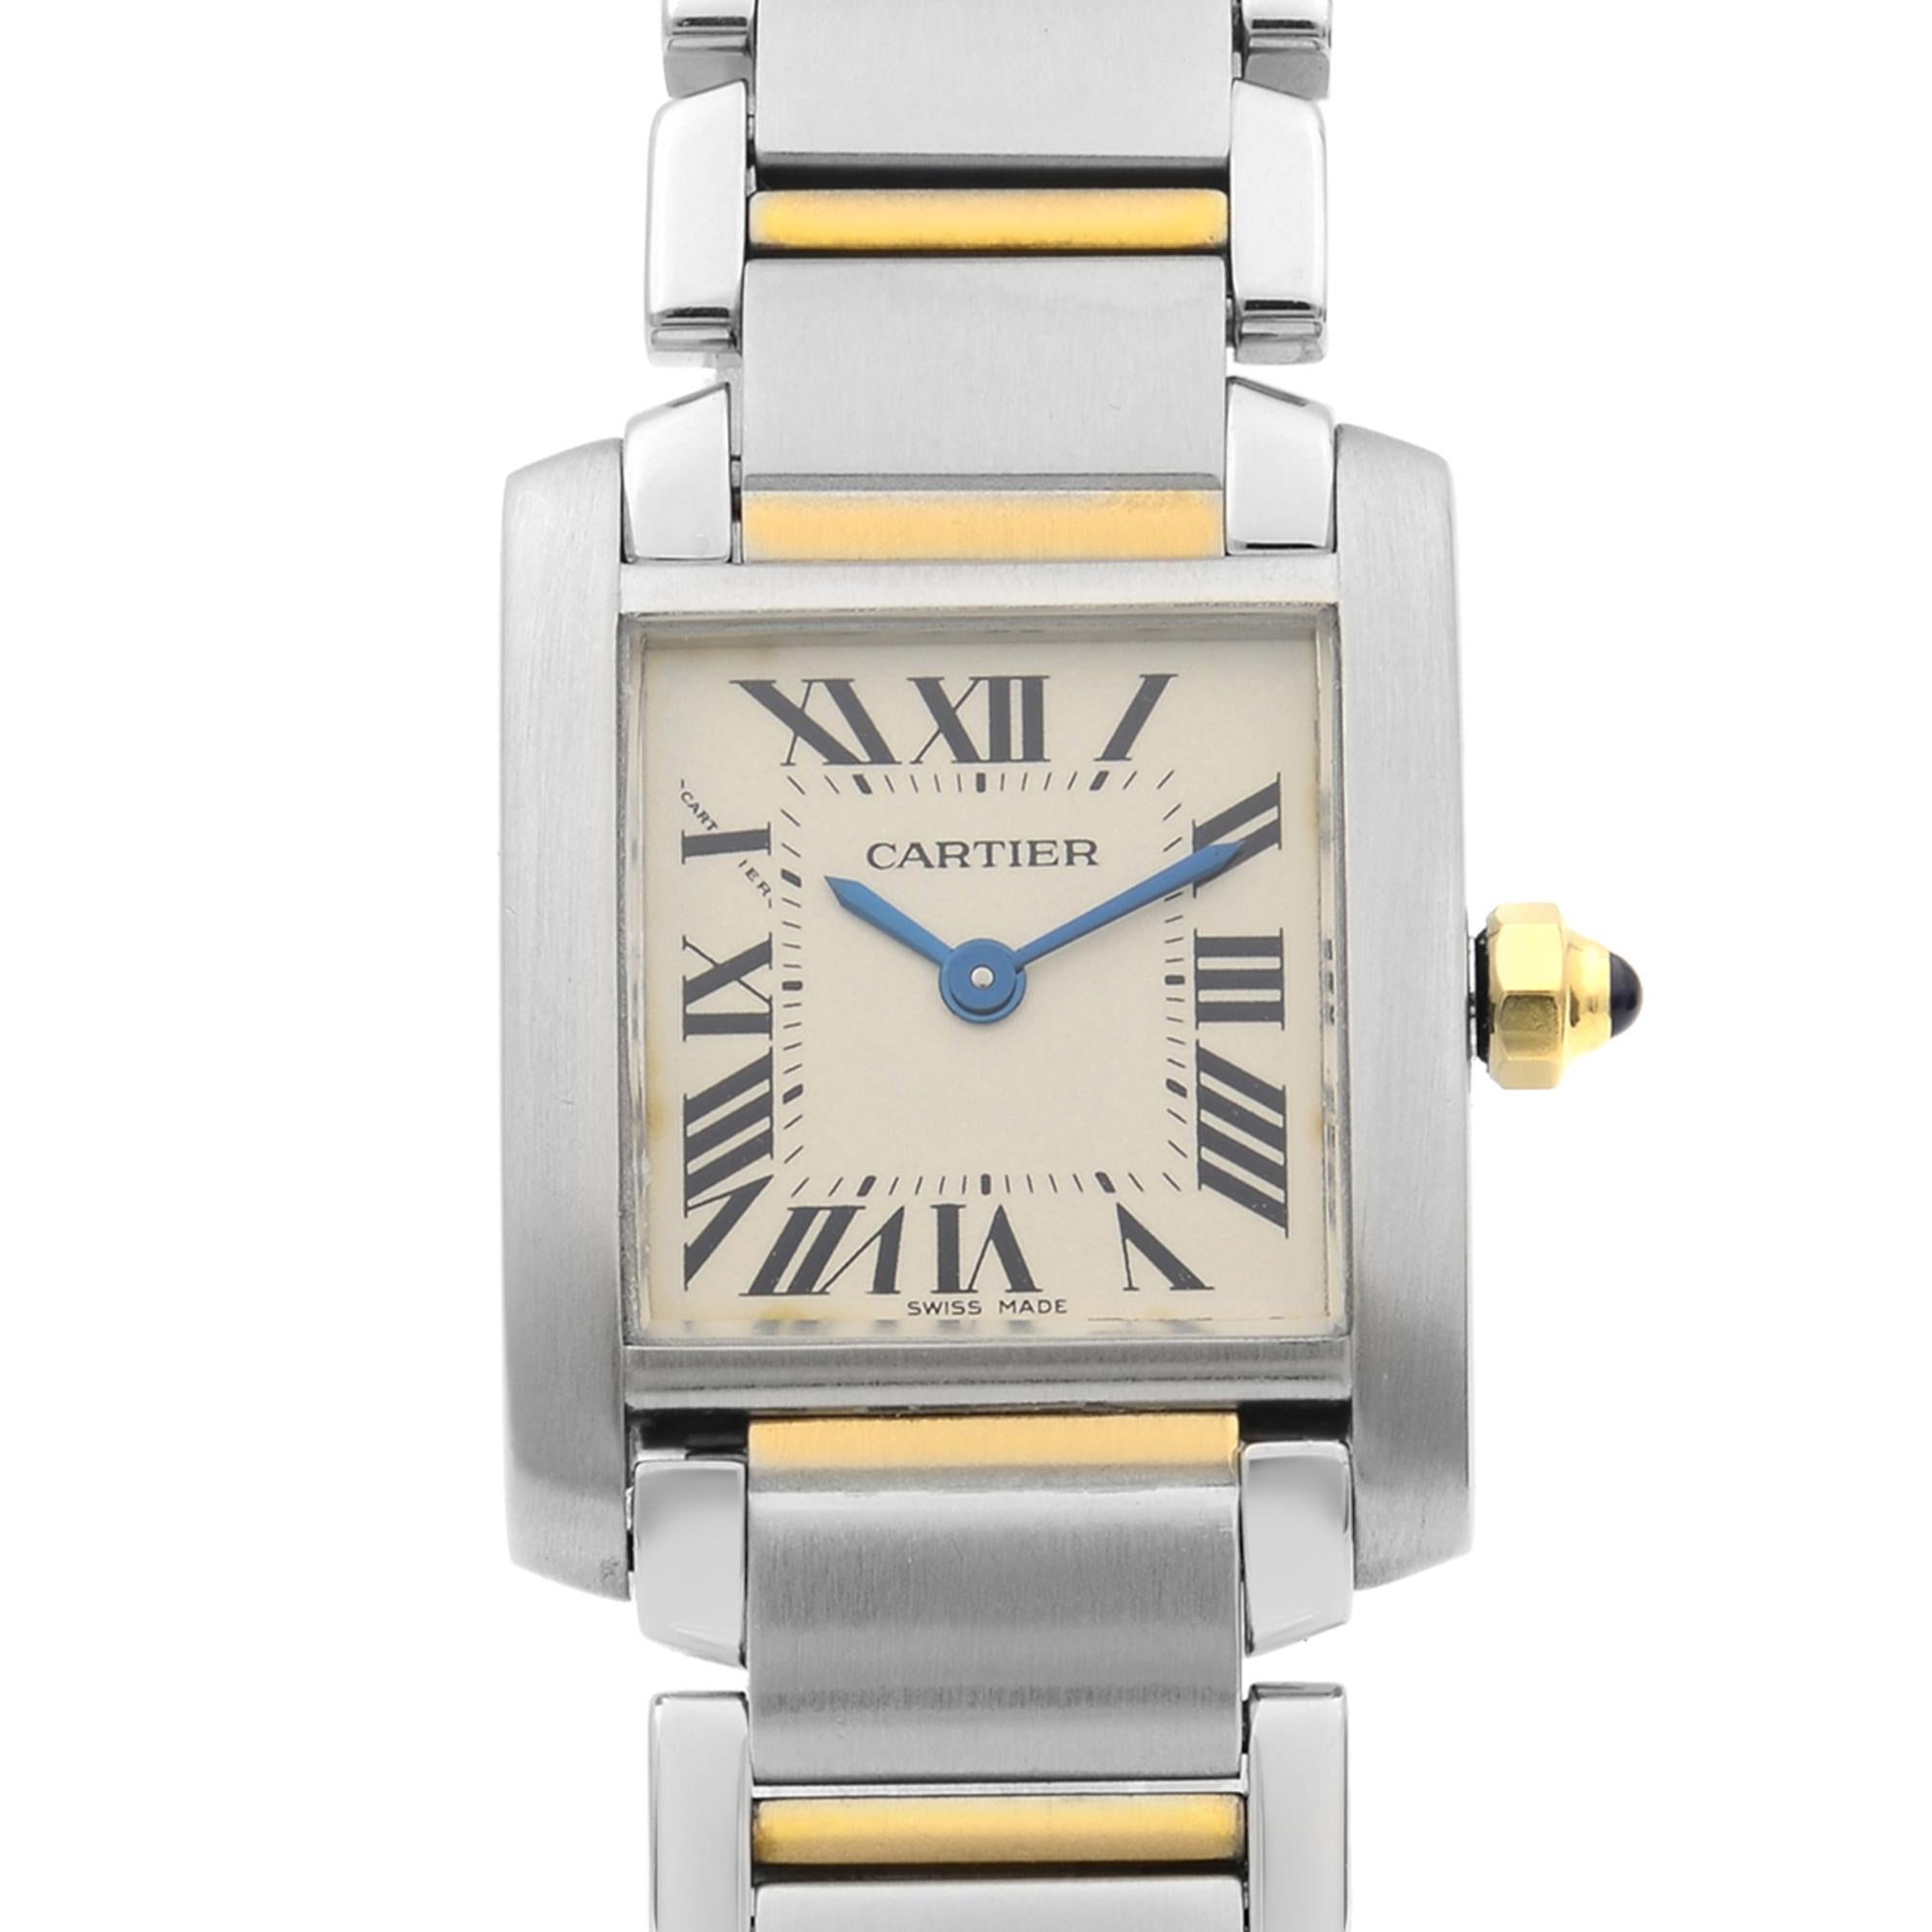 This pre-owned Cartier Tank  W51007Q4 is a beautiful Ladie's timepiece that is powered by quartz (battery) movement which is cased in a stainless steel case. It has a  rectangle shape face, no features dial and has roman numerals style hour markers.